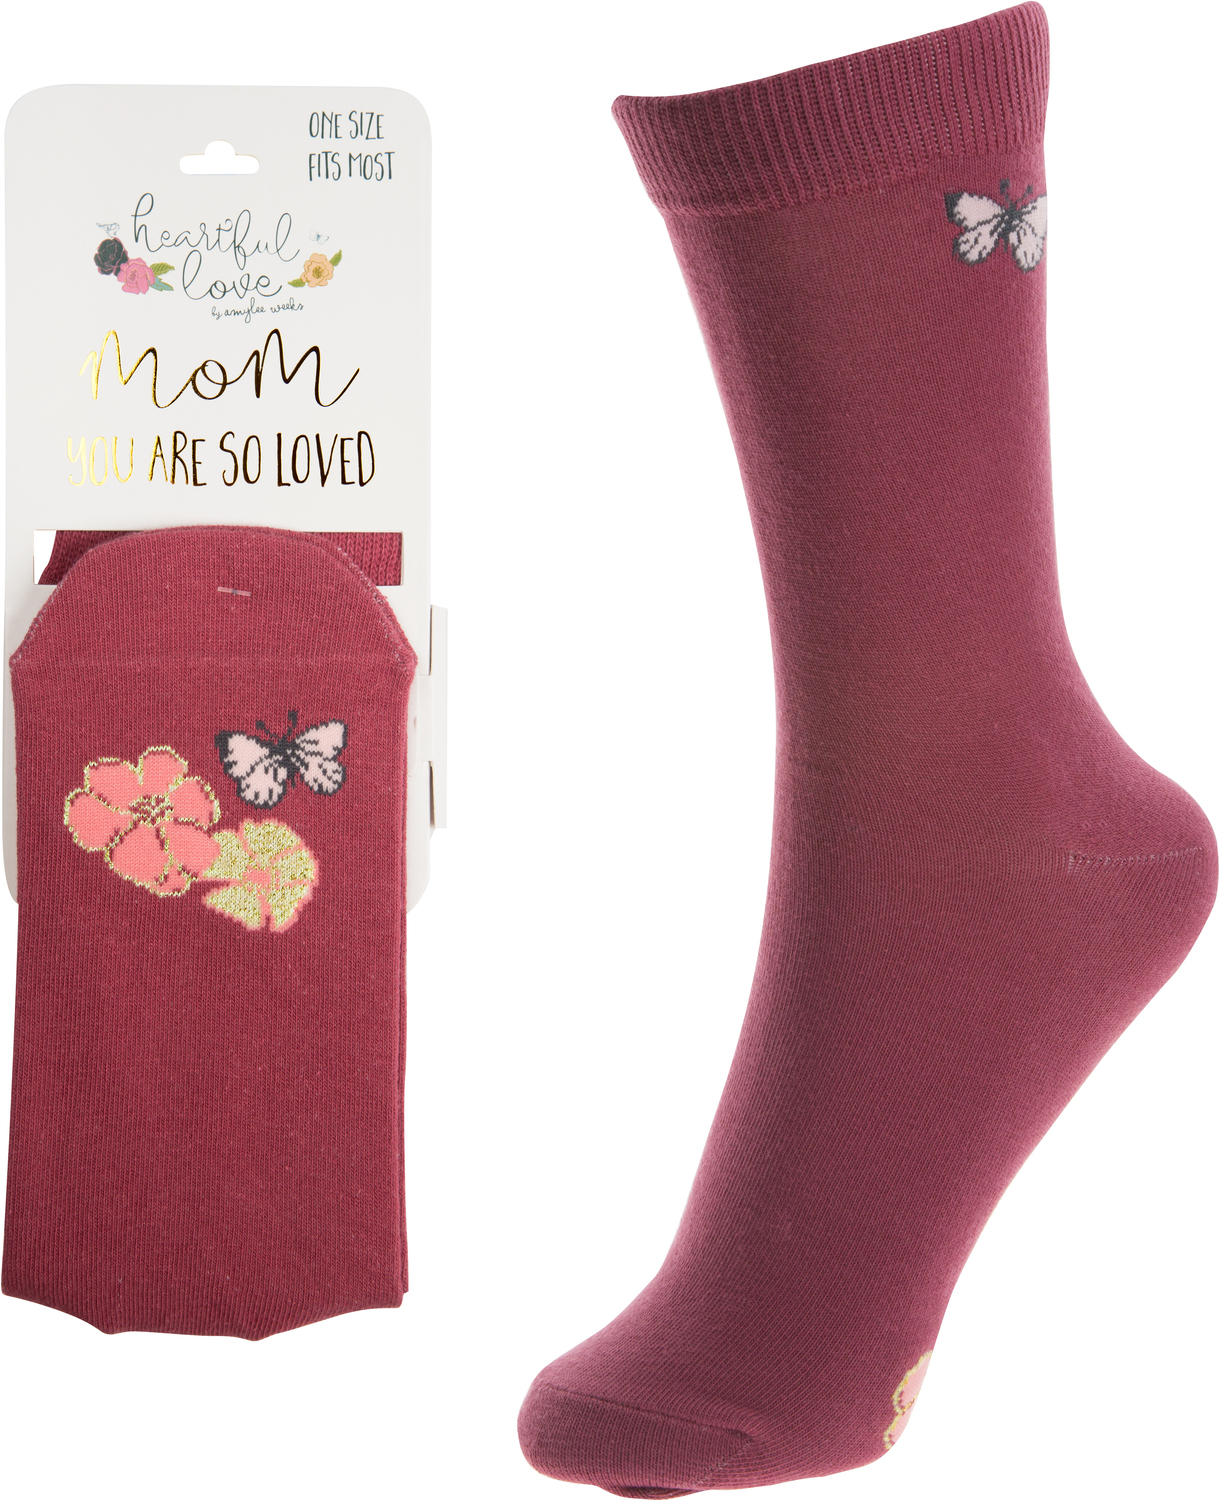 Mom by Heartful Love - Mom - Ladies Cotton Blend Sock